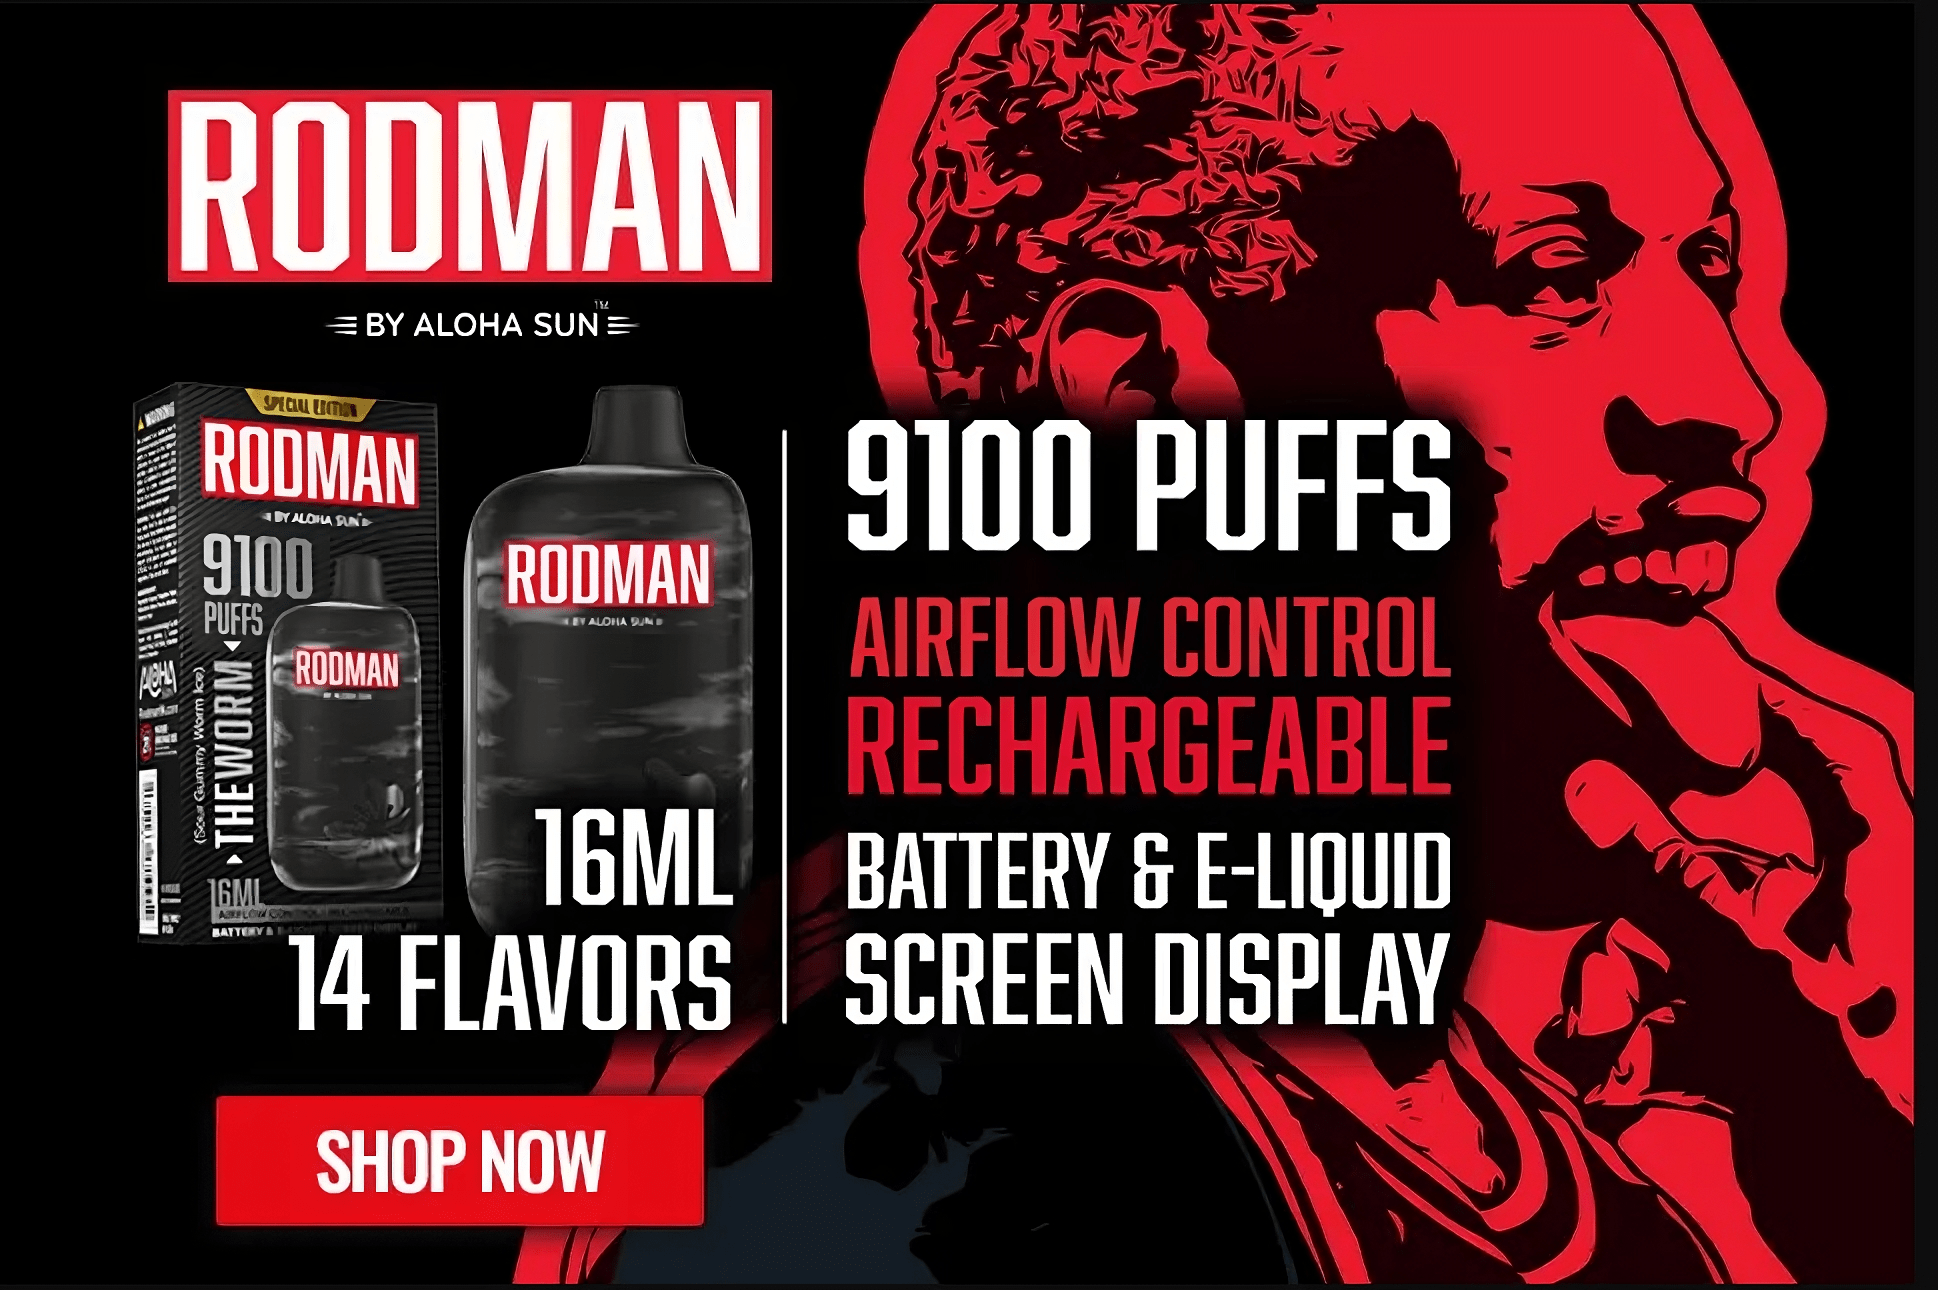 Buy Rodman Vape 9100 puffs Aloha Sun products Noe Available at I Love Vape  with best Price .